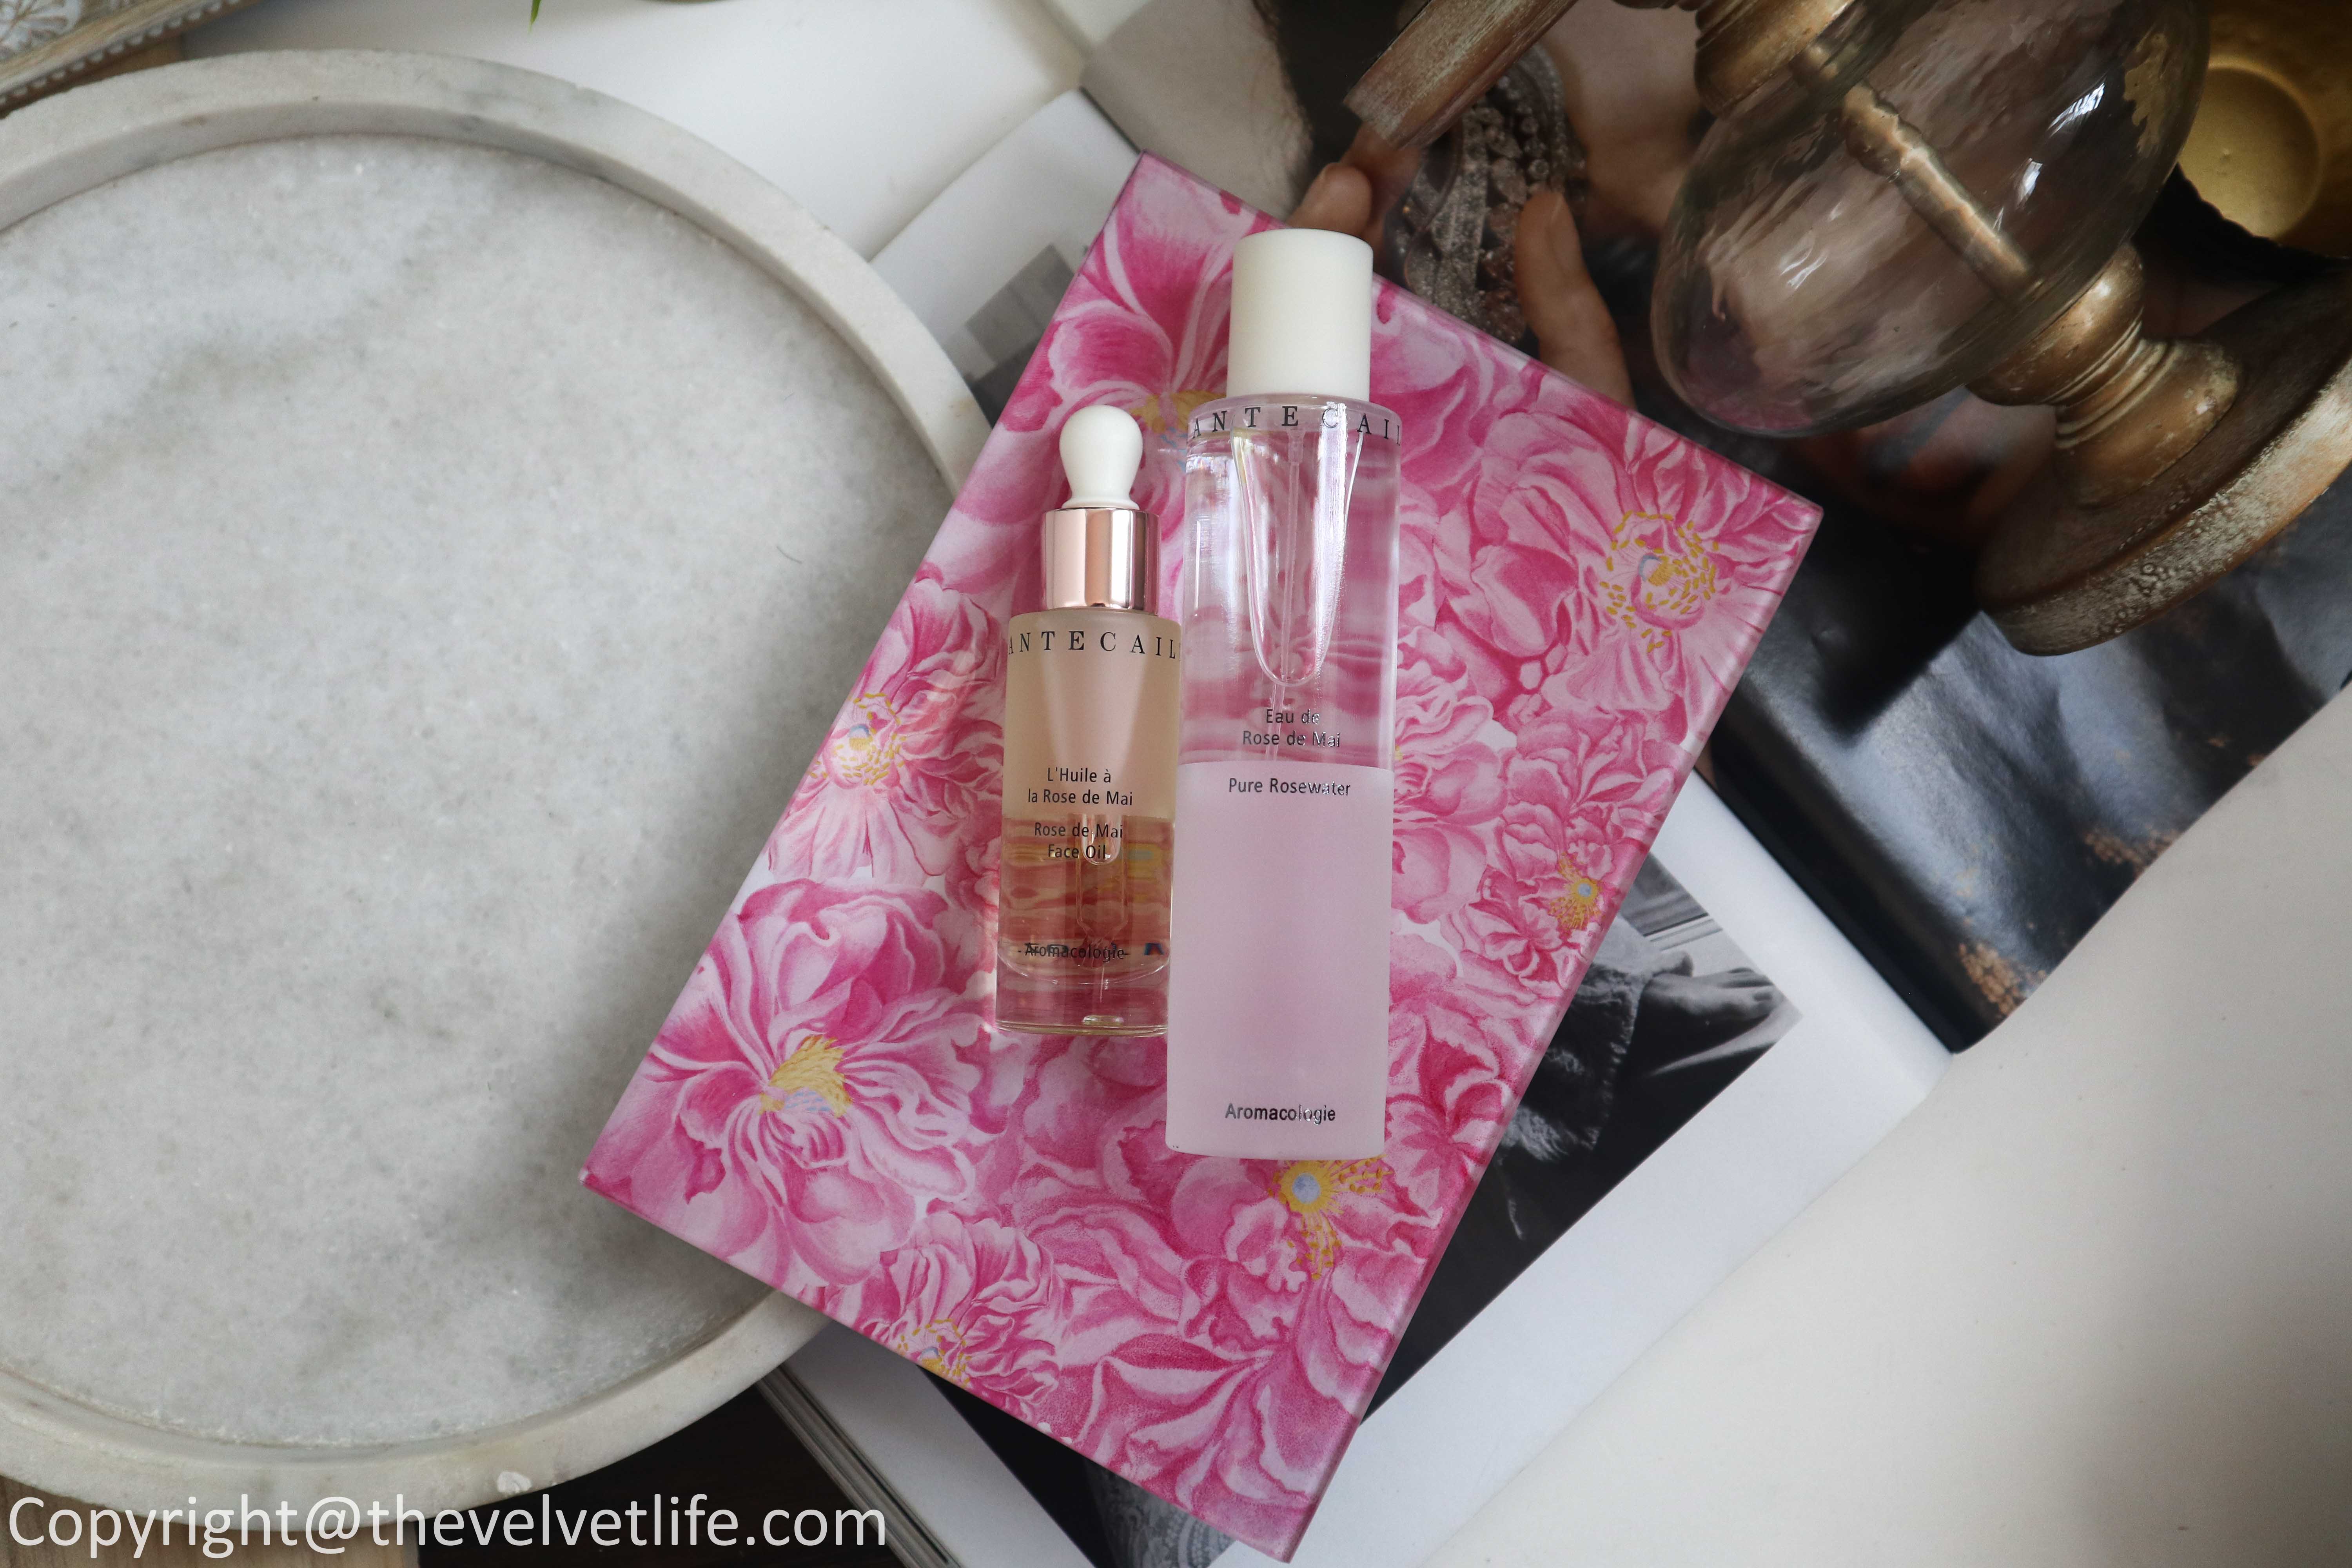 Review of the new John Derian x Chantecaille Rose de Mai Harvest Set which includes Pure rosewater, Rose de Mai face oil, Rose de mai harvest tray